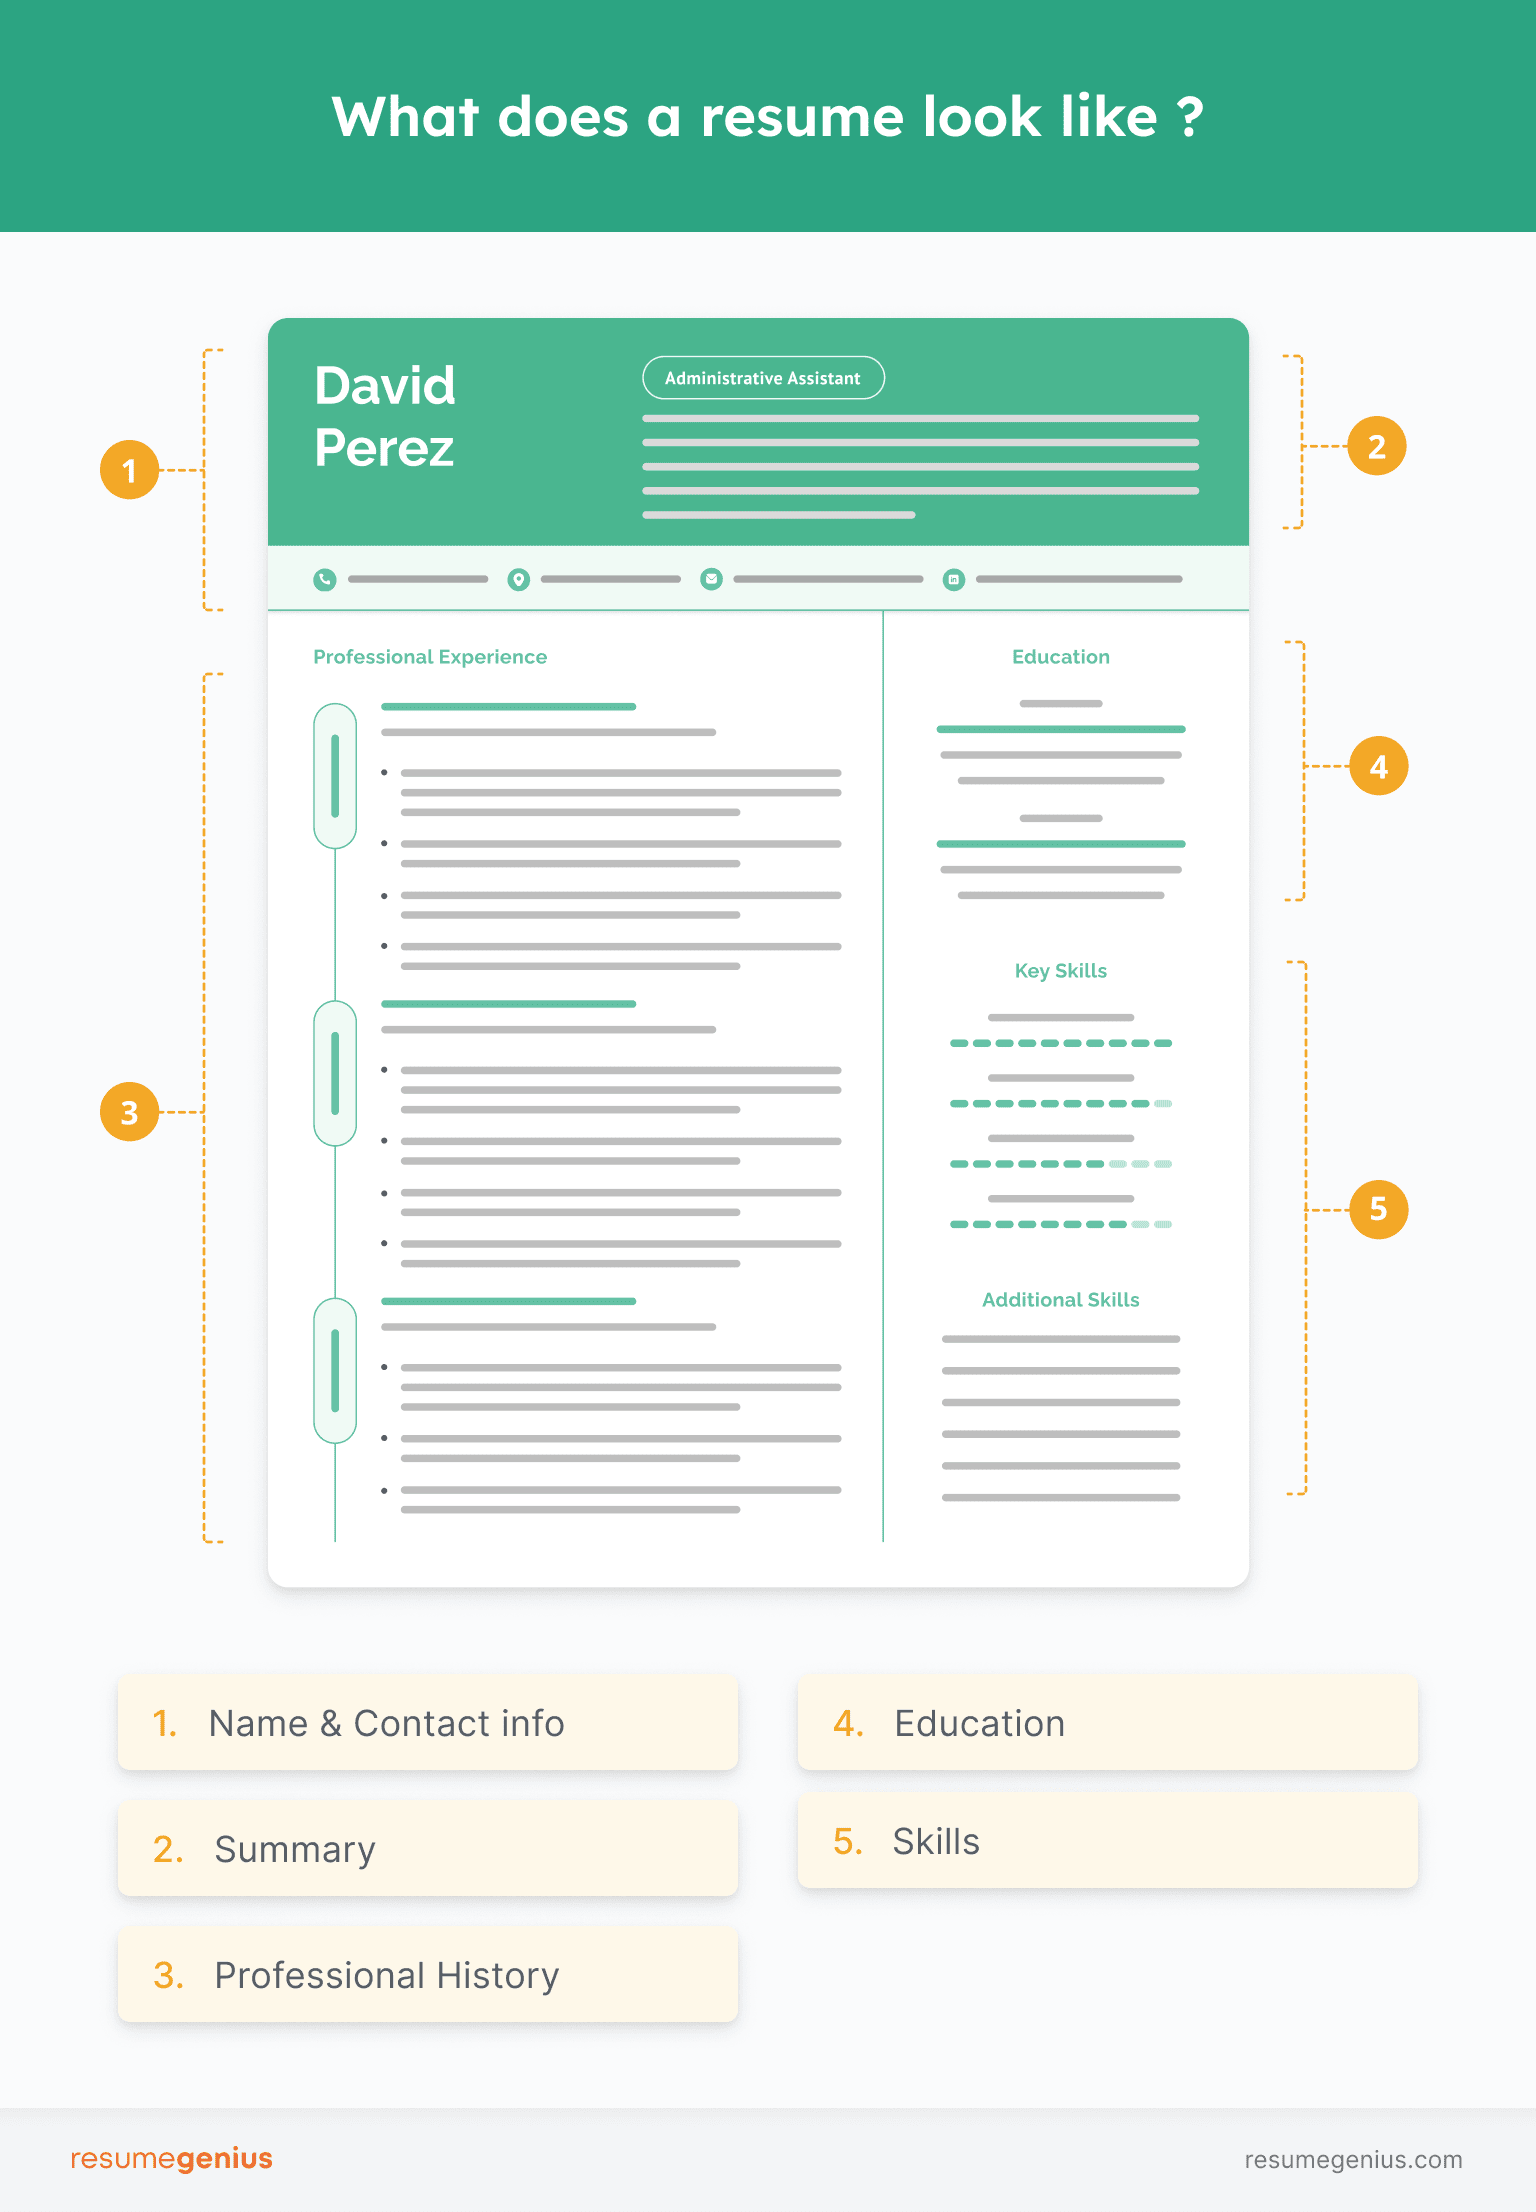 Illustration of what a resume looks like with each section labelled